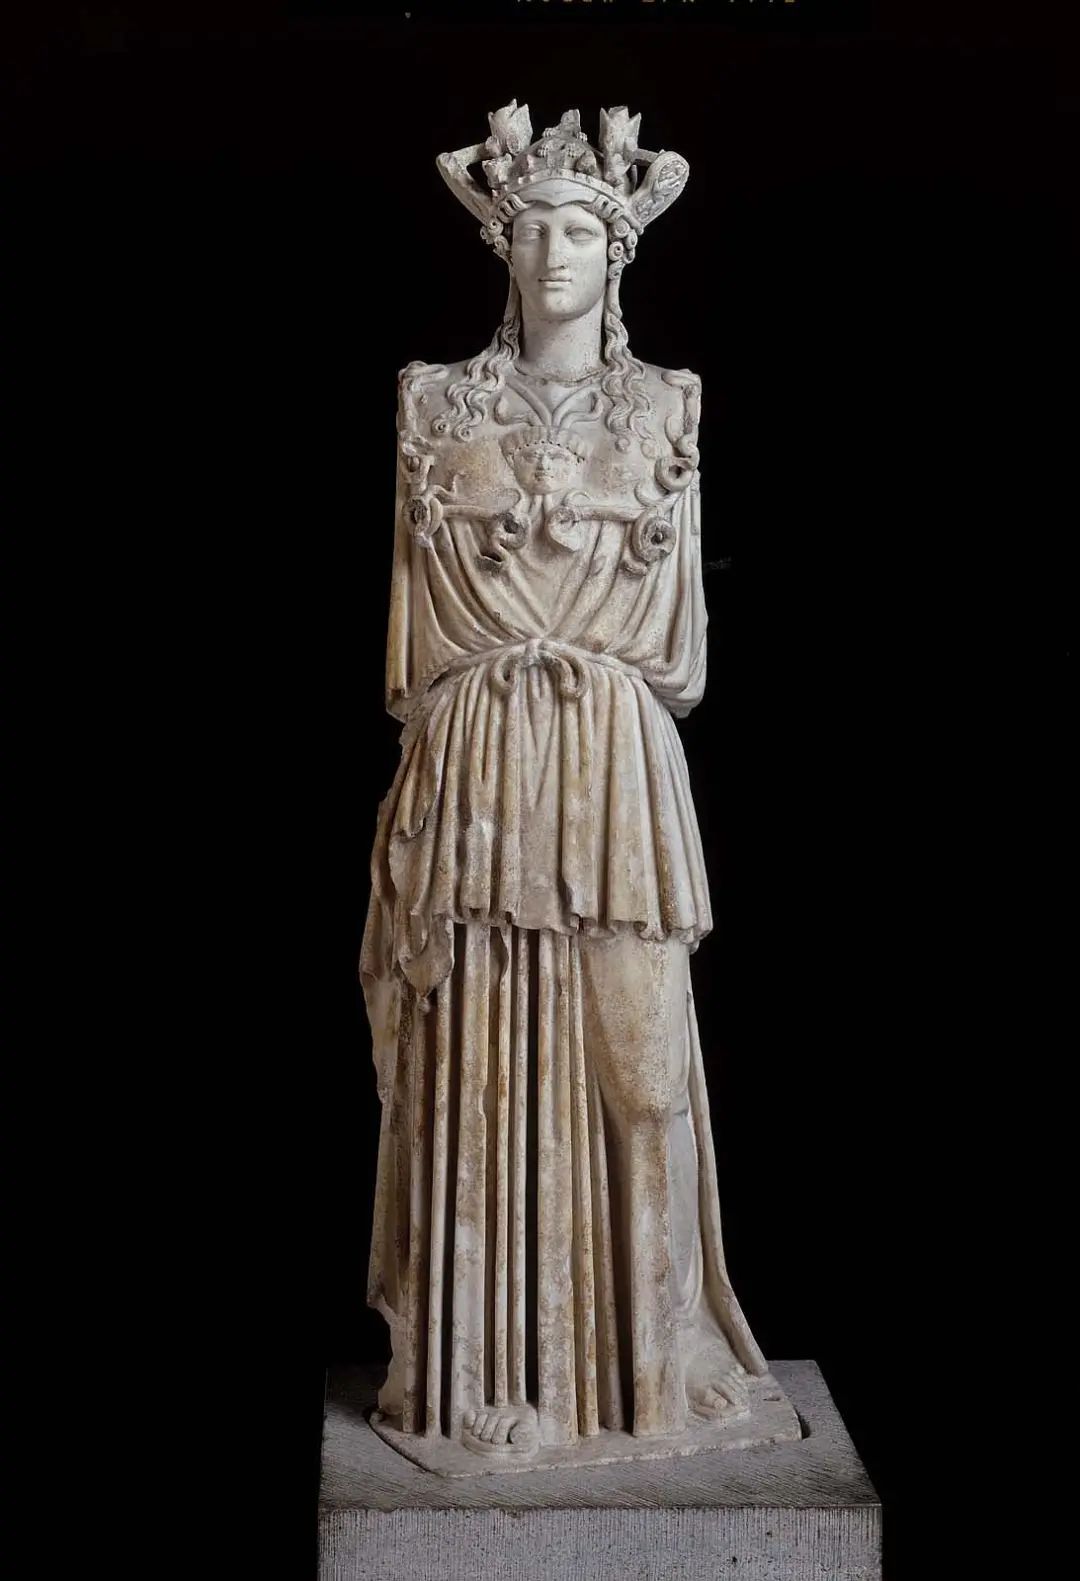 Statue of Athena Parthenos (the Virgin Goddess), Roman, Imperial Period, 2nd or 3rd century A.D., Marble from Mt. Pentelikon near Athens